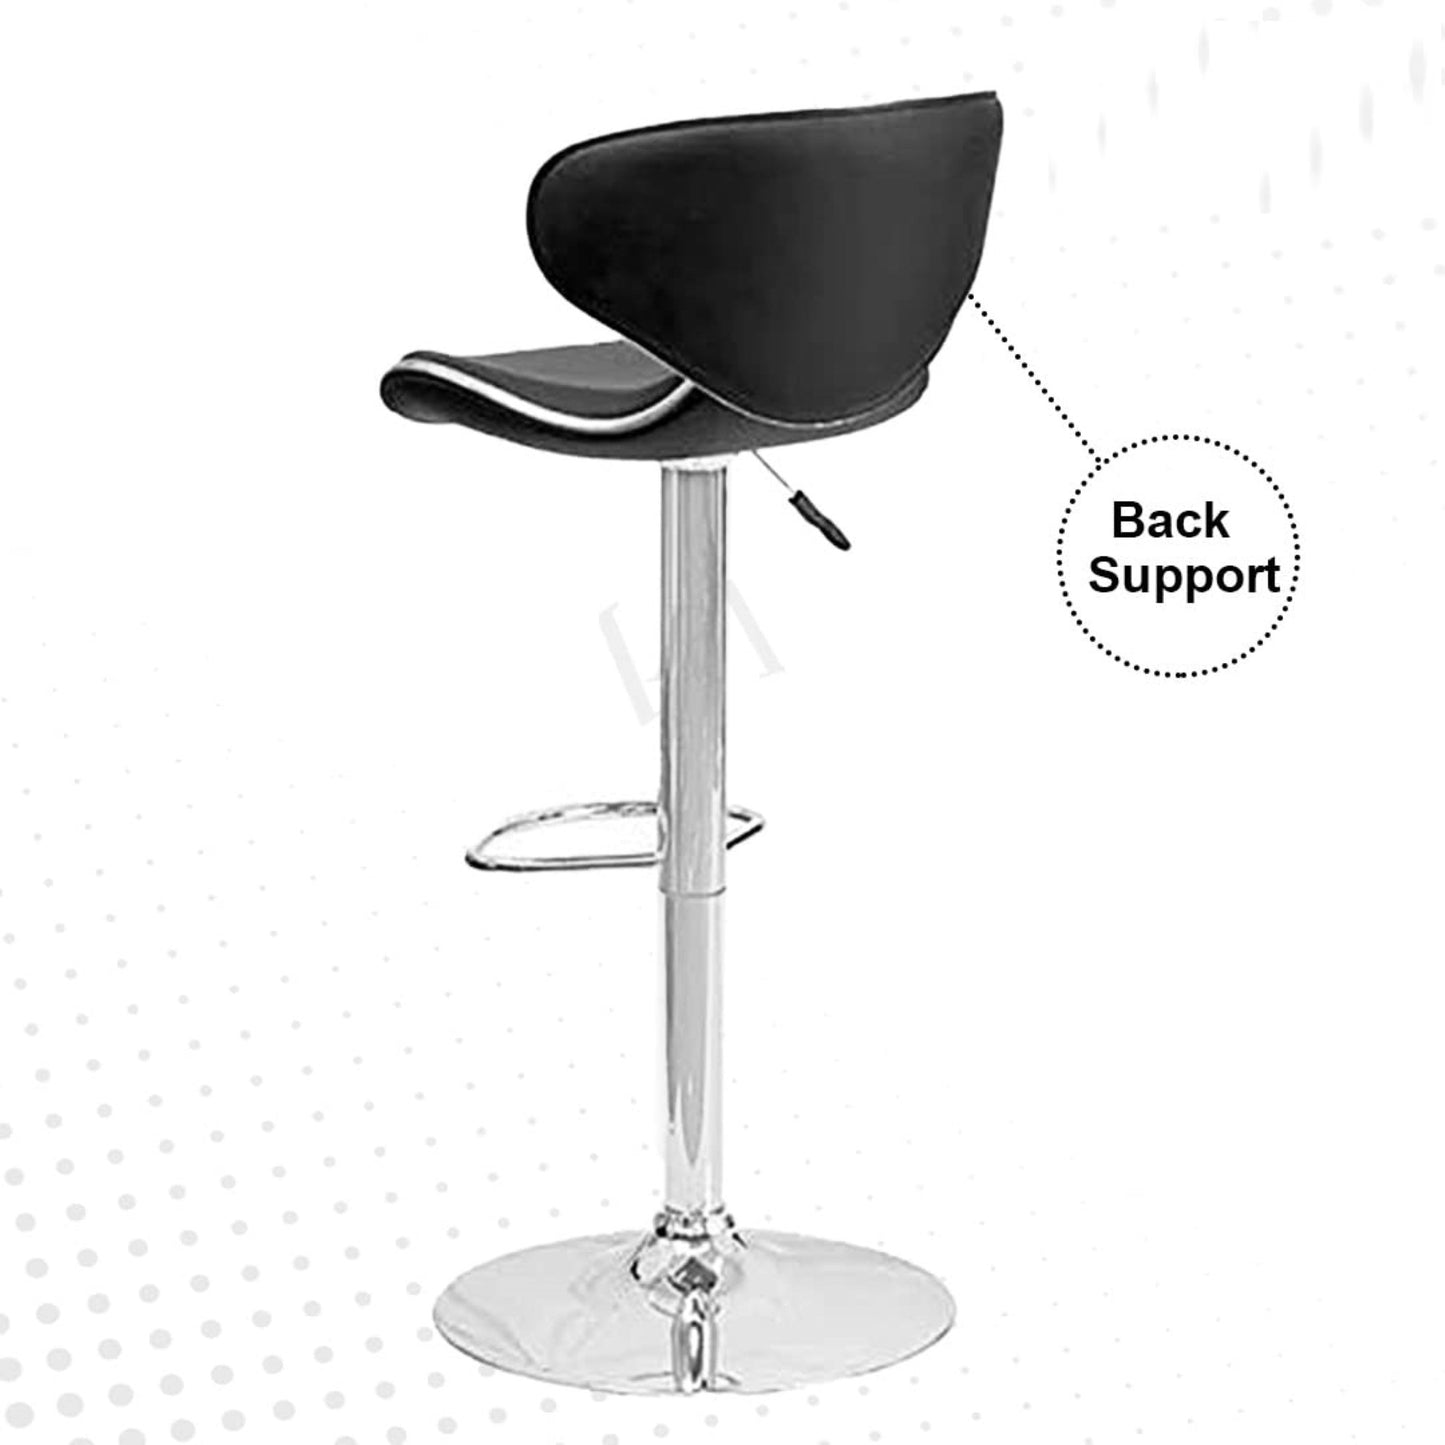 Bowzar REVOLVING Black Height Adjustable BAR Stool/Kitchen Chair Suitable for Kitchen, Cafeteria, Dining,Pubs, Office,Shops